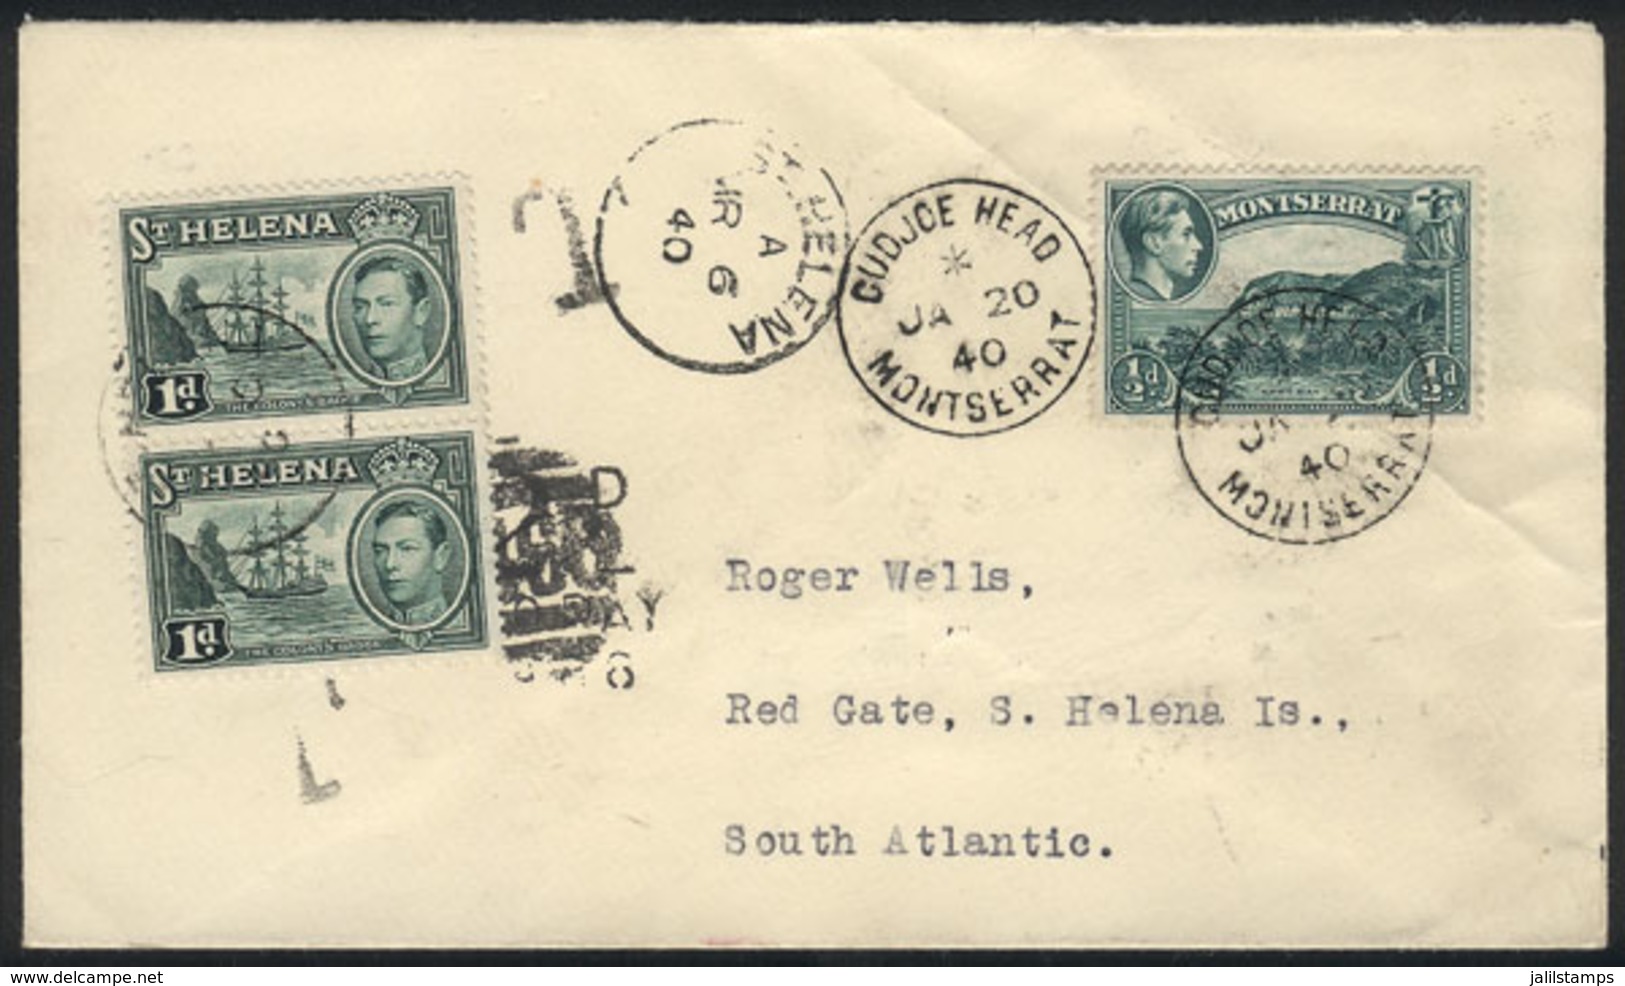 SAINT HELENA: Stamps Used As POSTAGE DUE STAMPS: Cover Sent From Gudjoe Head (Montserrat) To Red Gate, Saint Helena, On  - Saint Helena Island